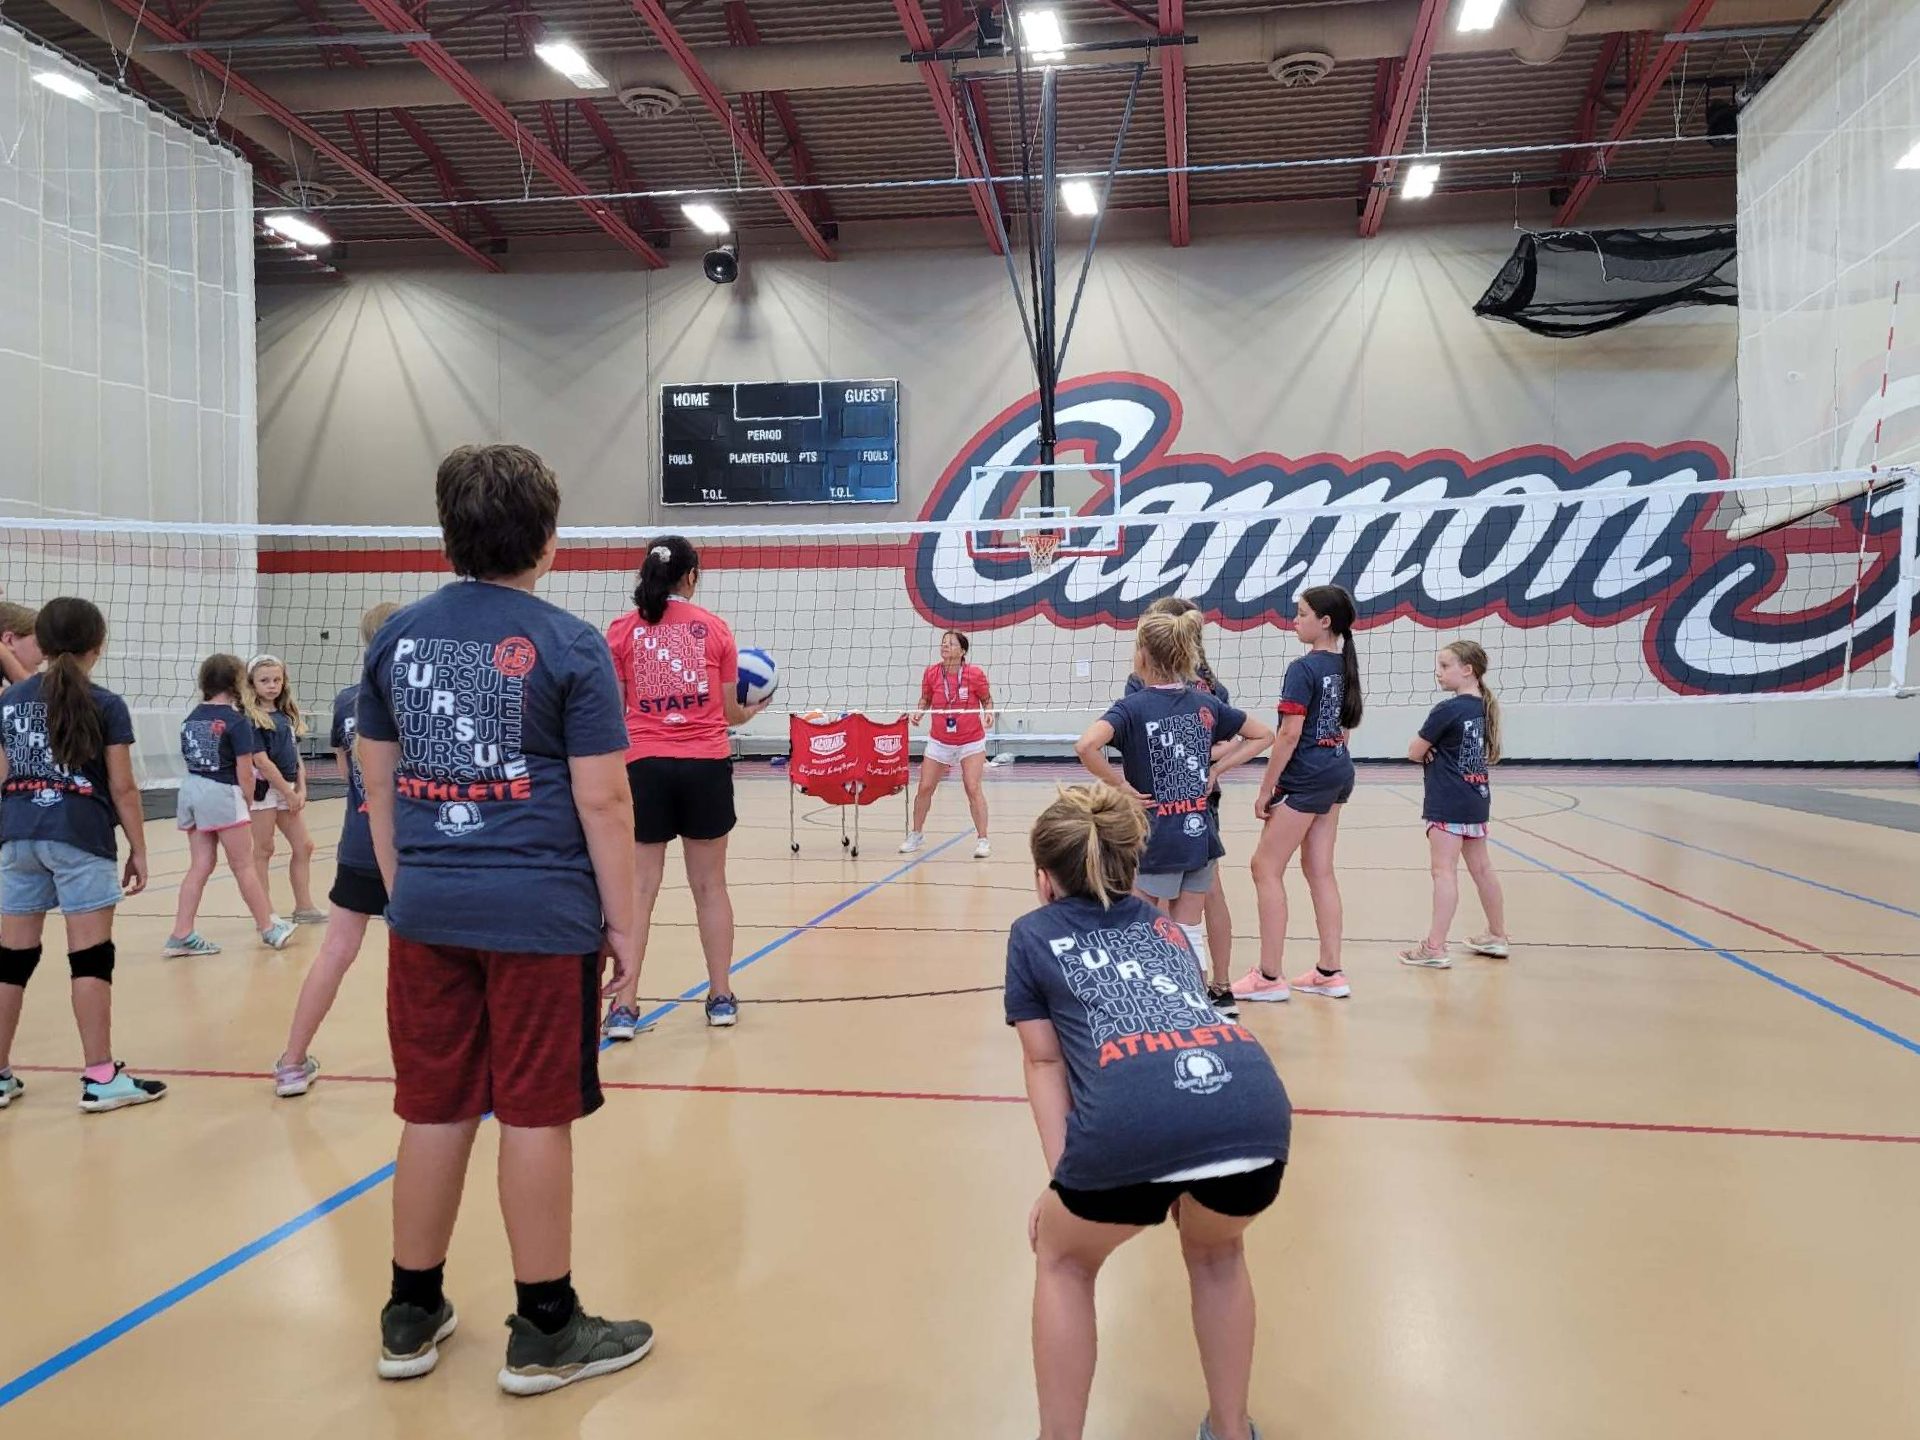 FCA Sports Leagues - Rochester, MN > Home